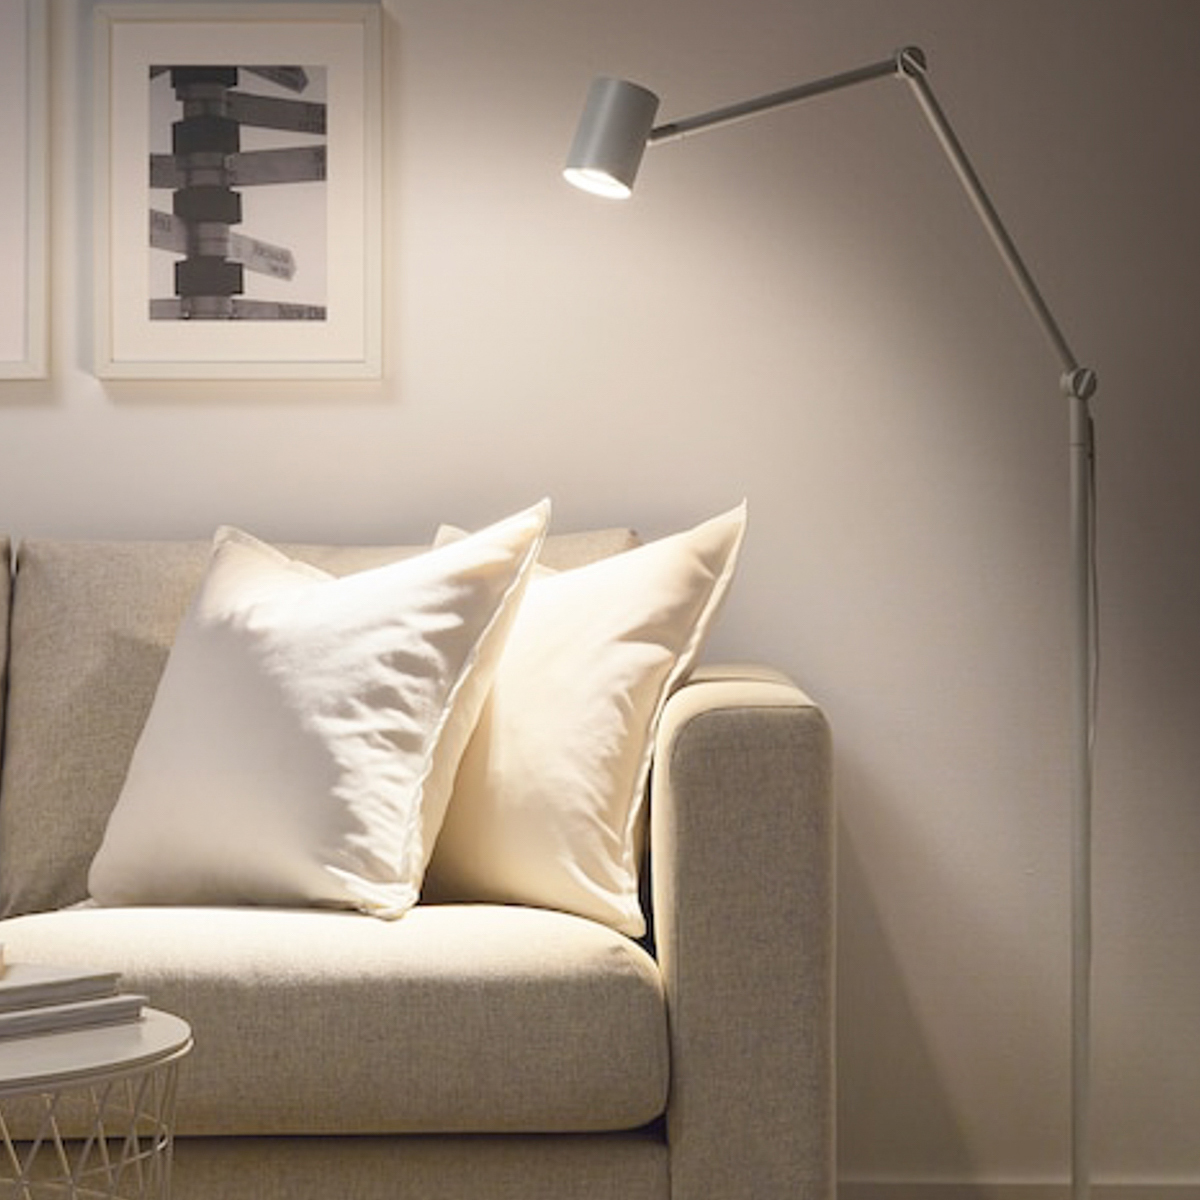 Shine Brighter and Freer with the Best Cordless Floor Lamp